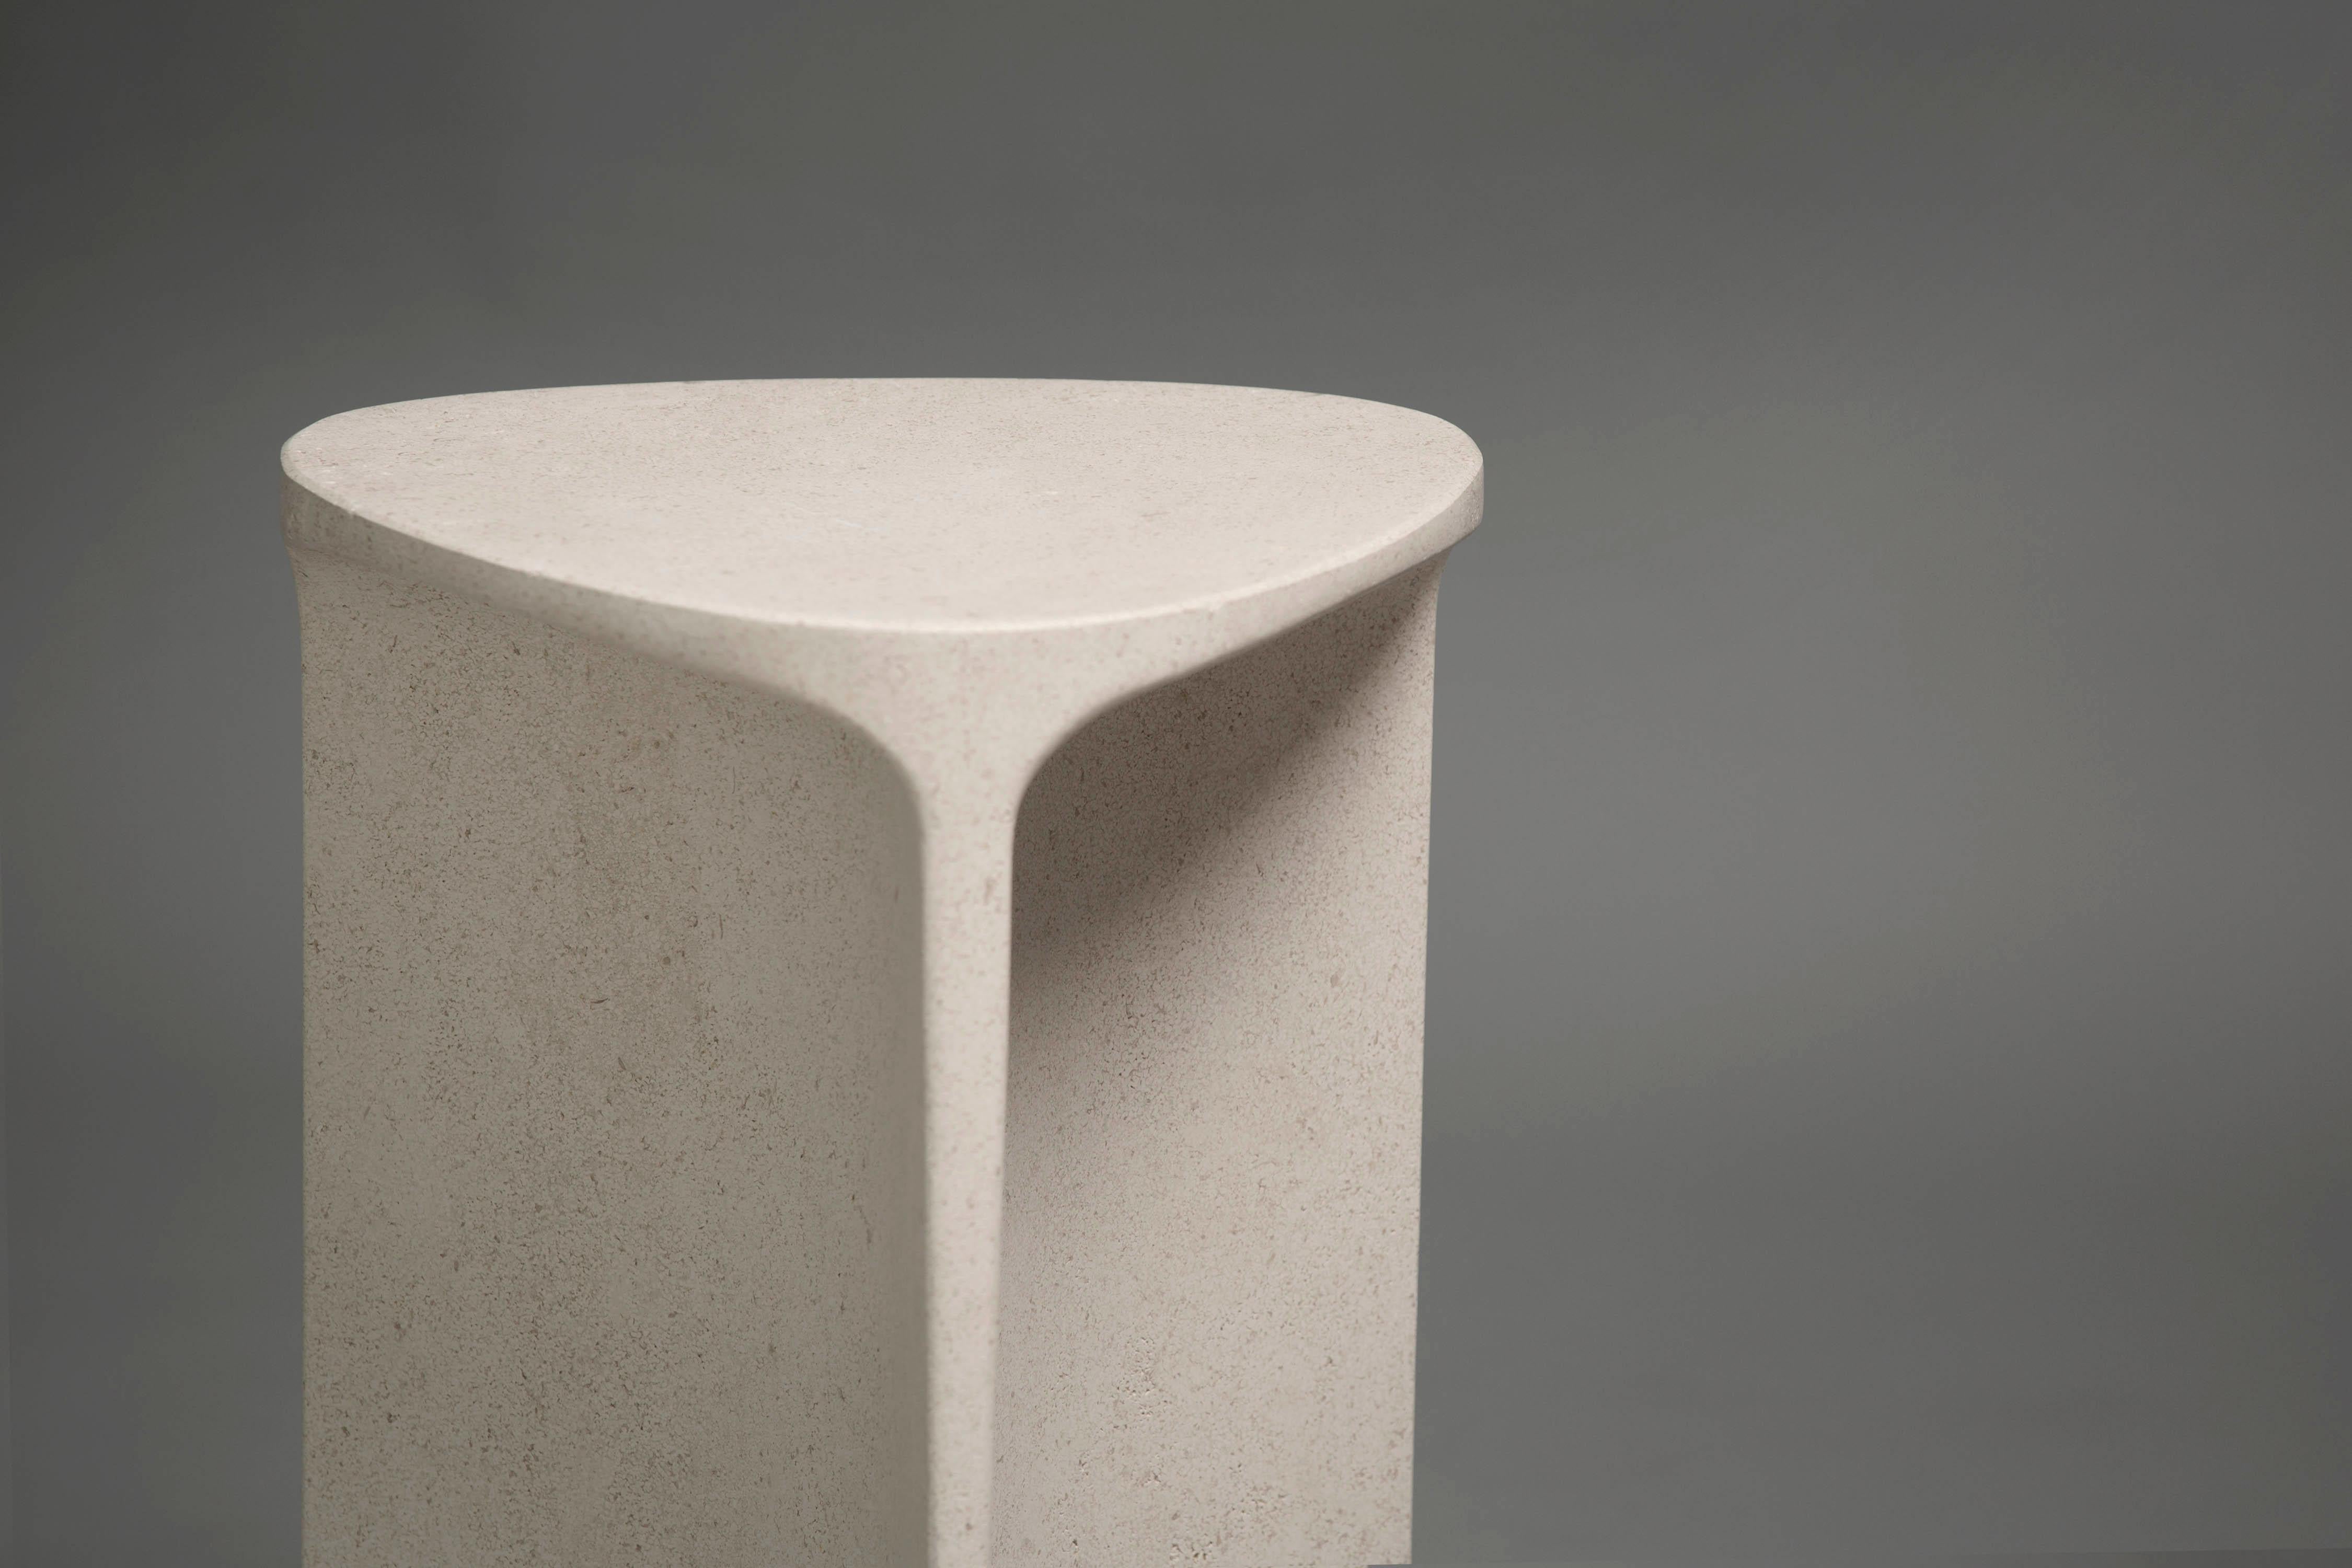 Carv occasional table is Cut from a single block of Chauvigny Limestone.
Essential and organic design, naturally creating a flat tabletop flowing
to a Y - shaped foot, revealing the stone’s veins
from the exterior surface through to it’s